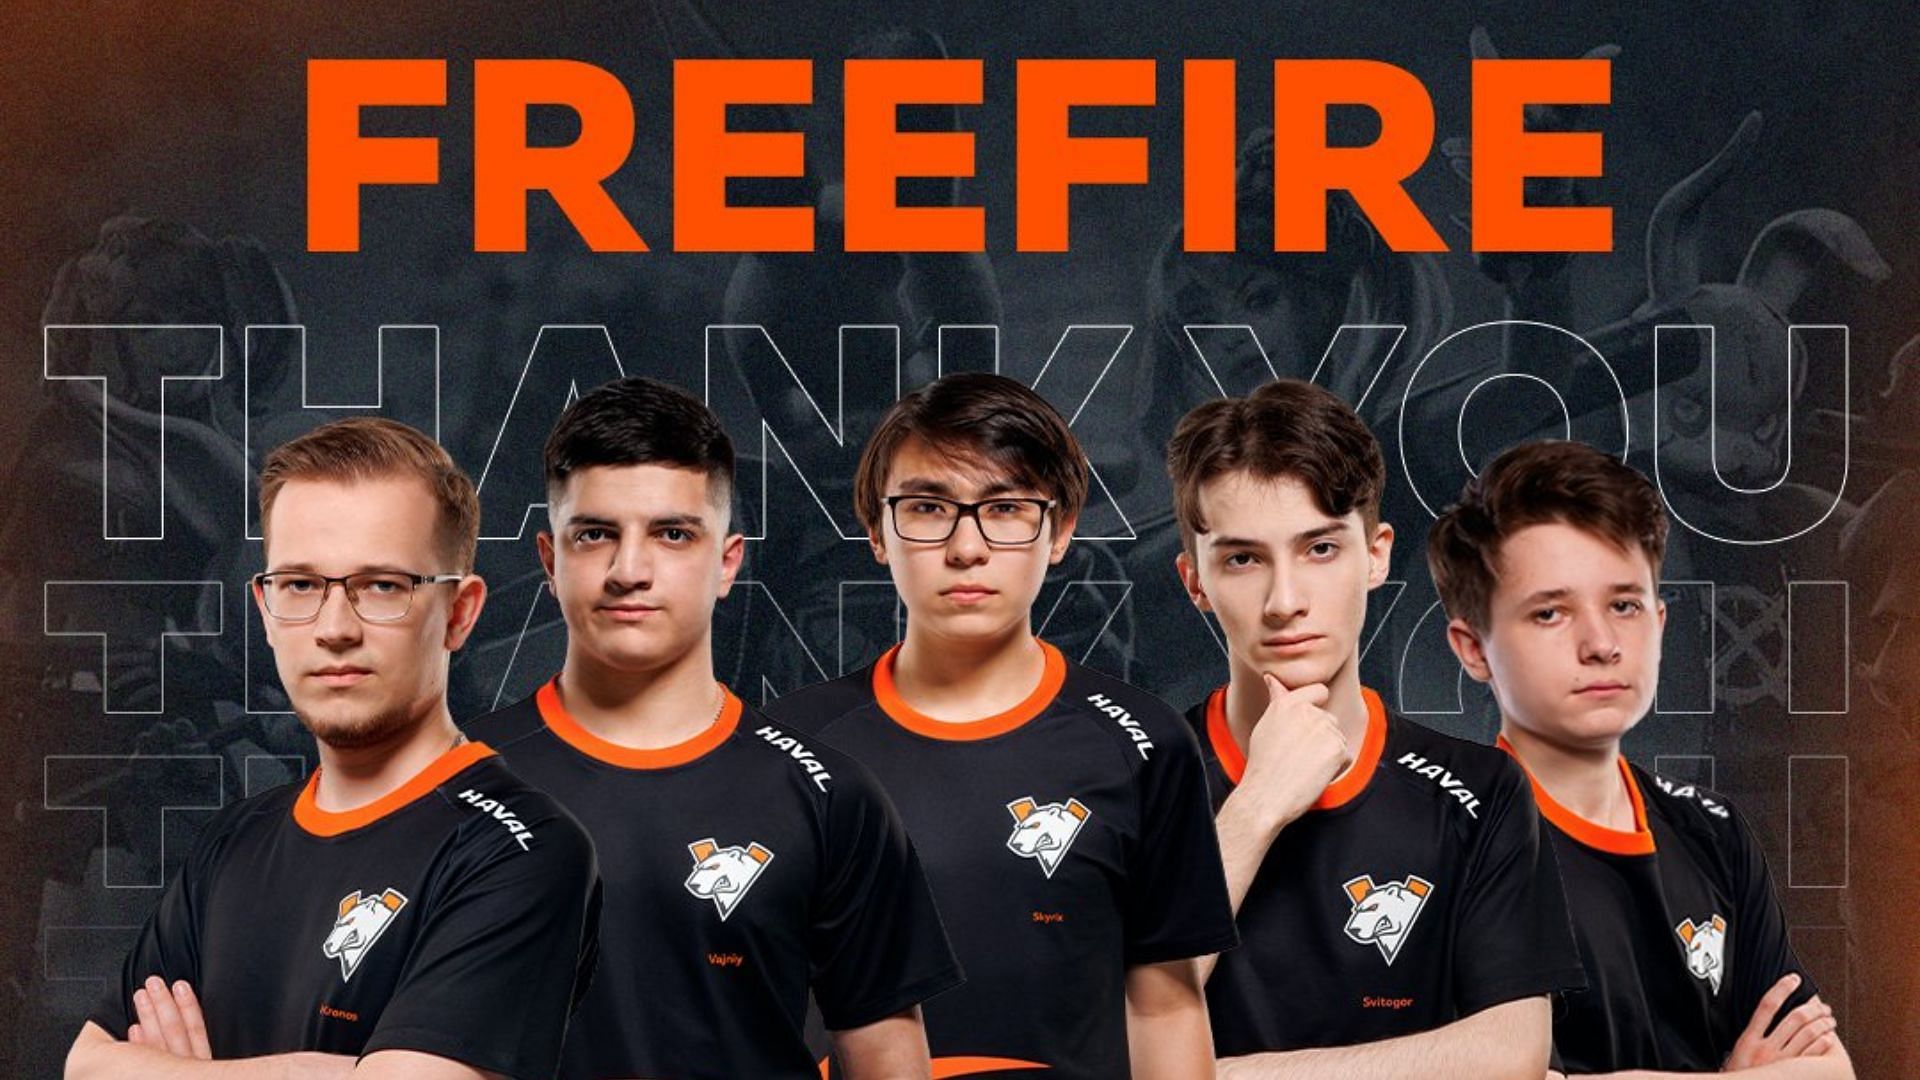 virtus-pro-disbands-their-free-fire-roster